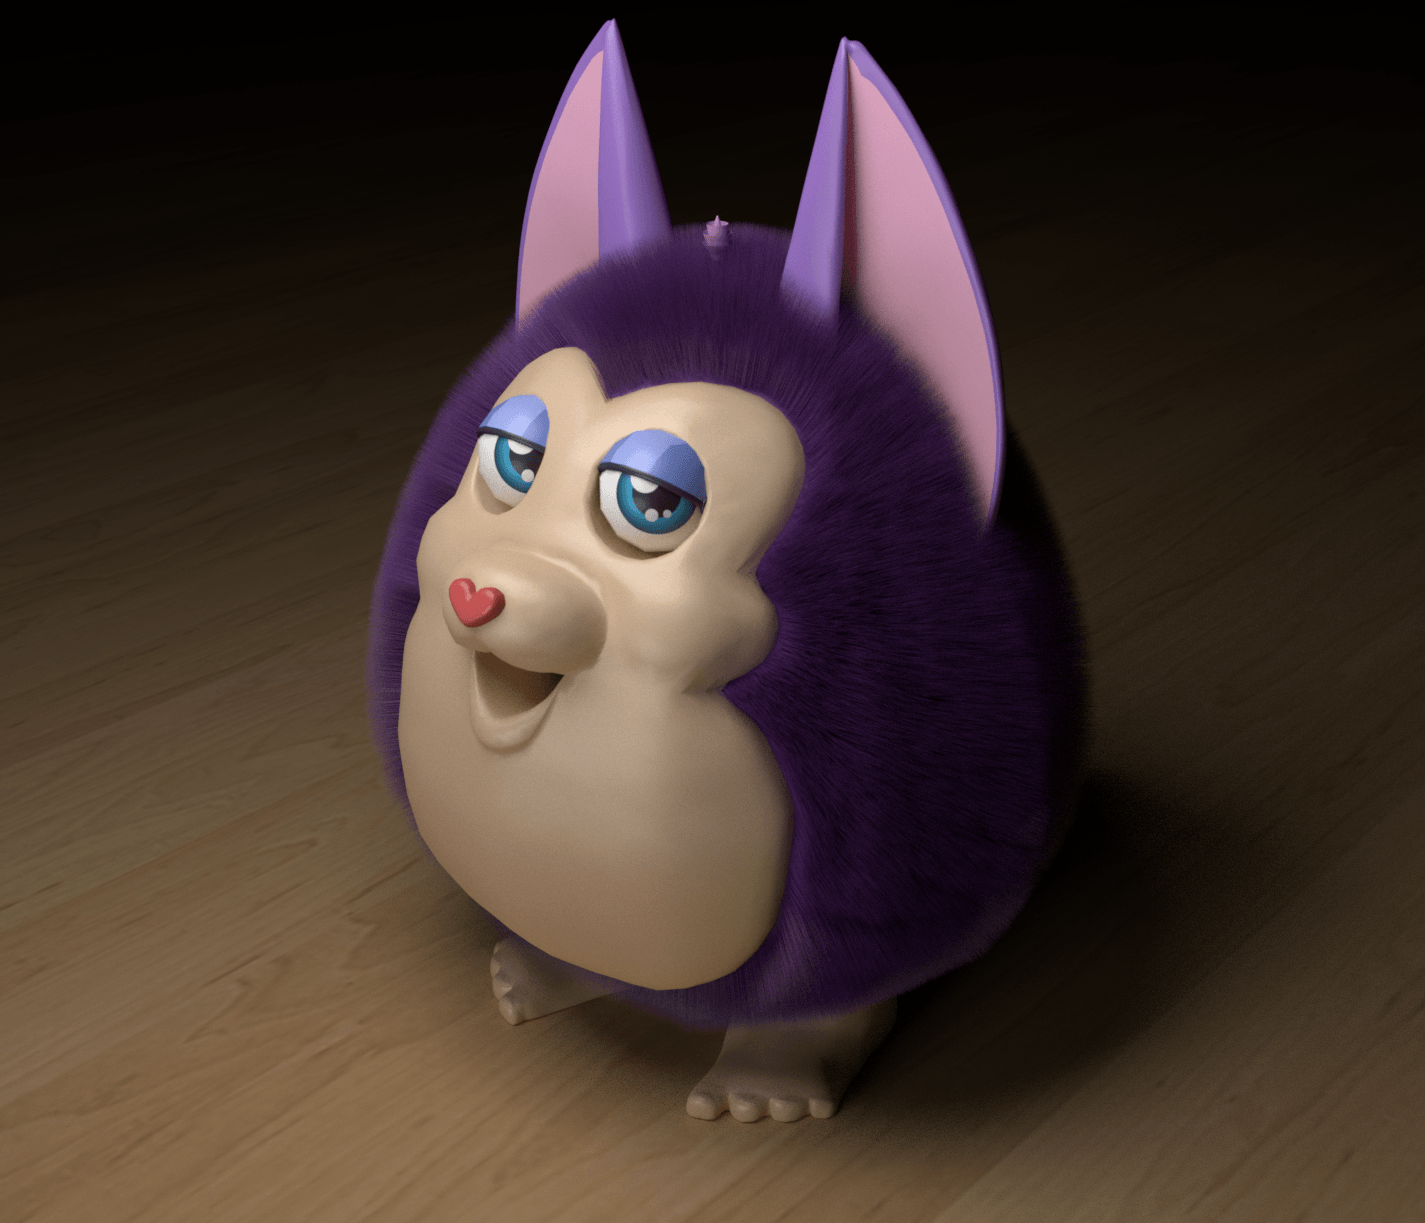 Tattletail but it actually has fur